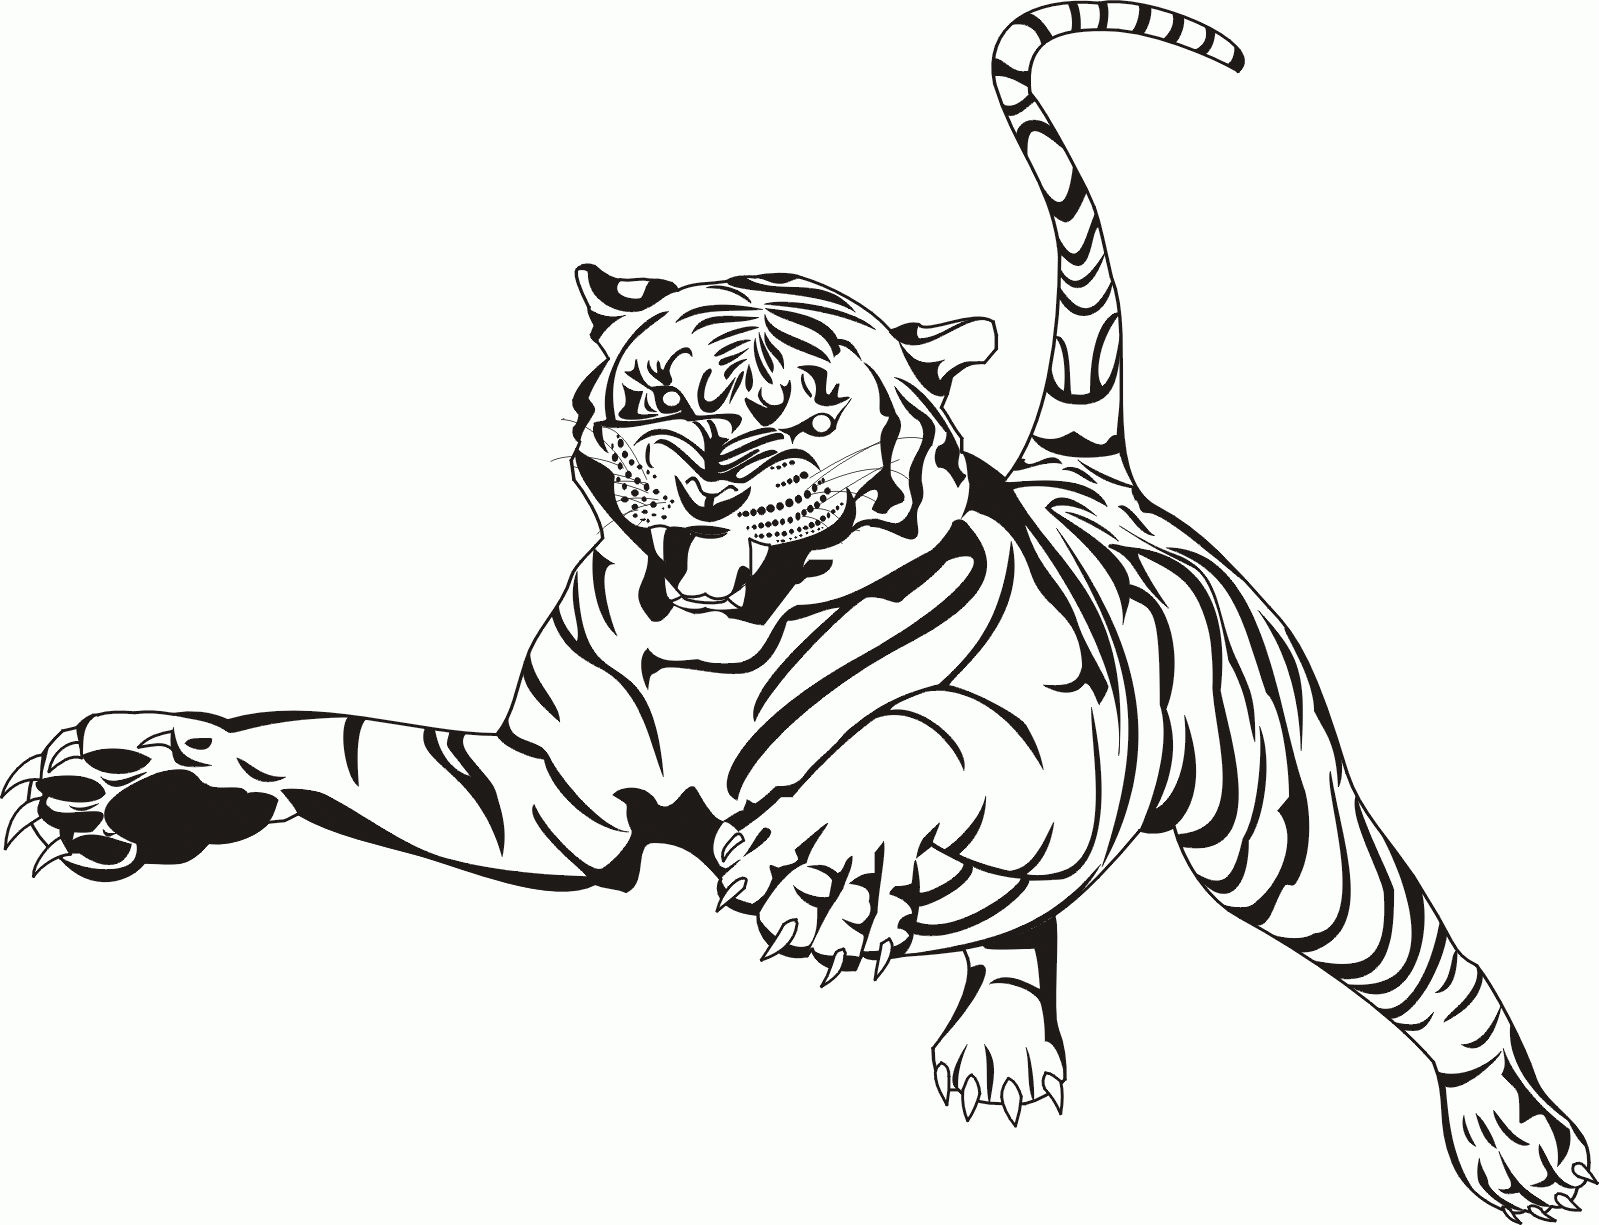 Coloring Pages Of Baby Tigers Coloring Home